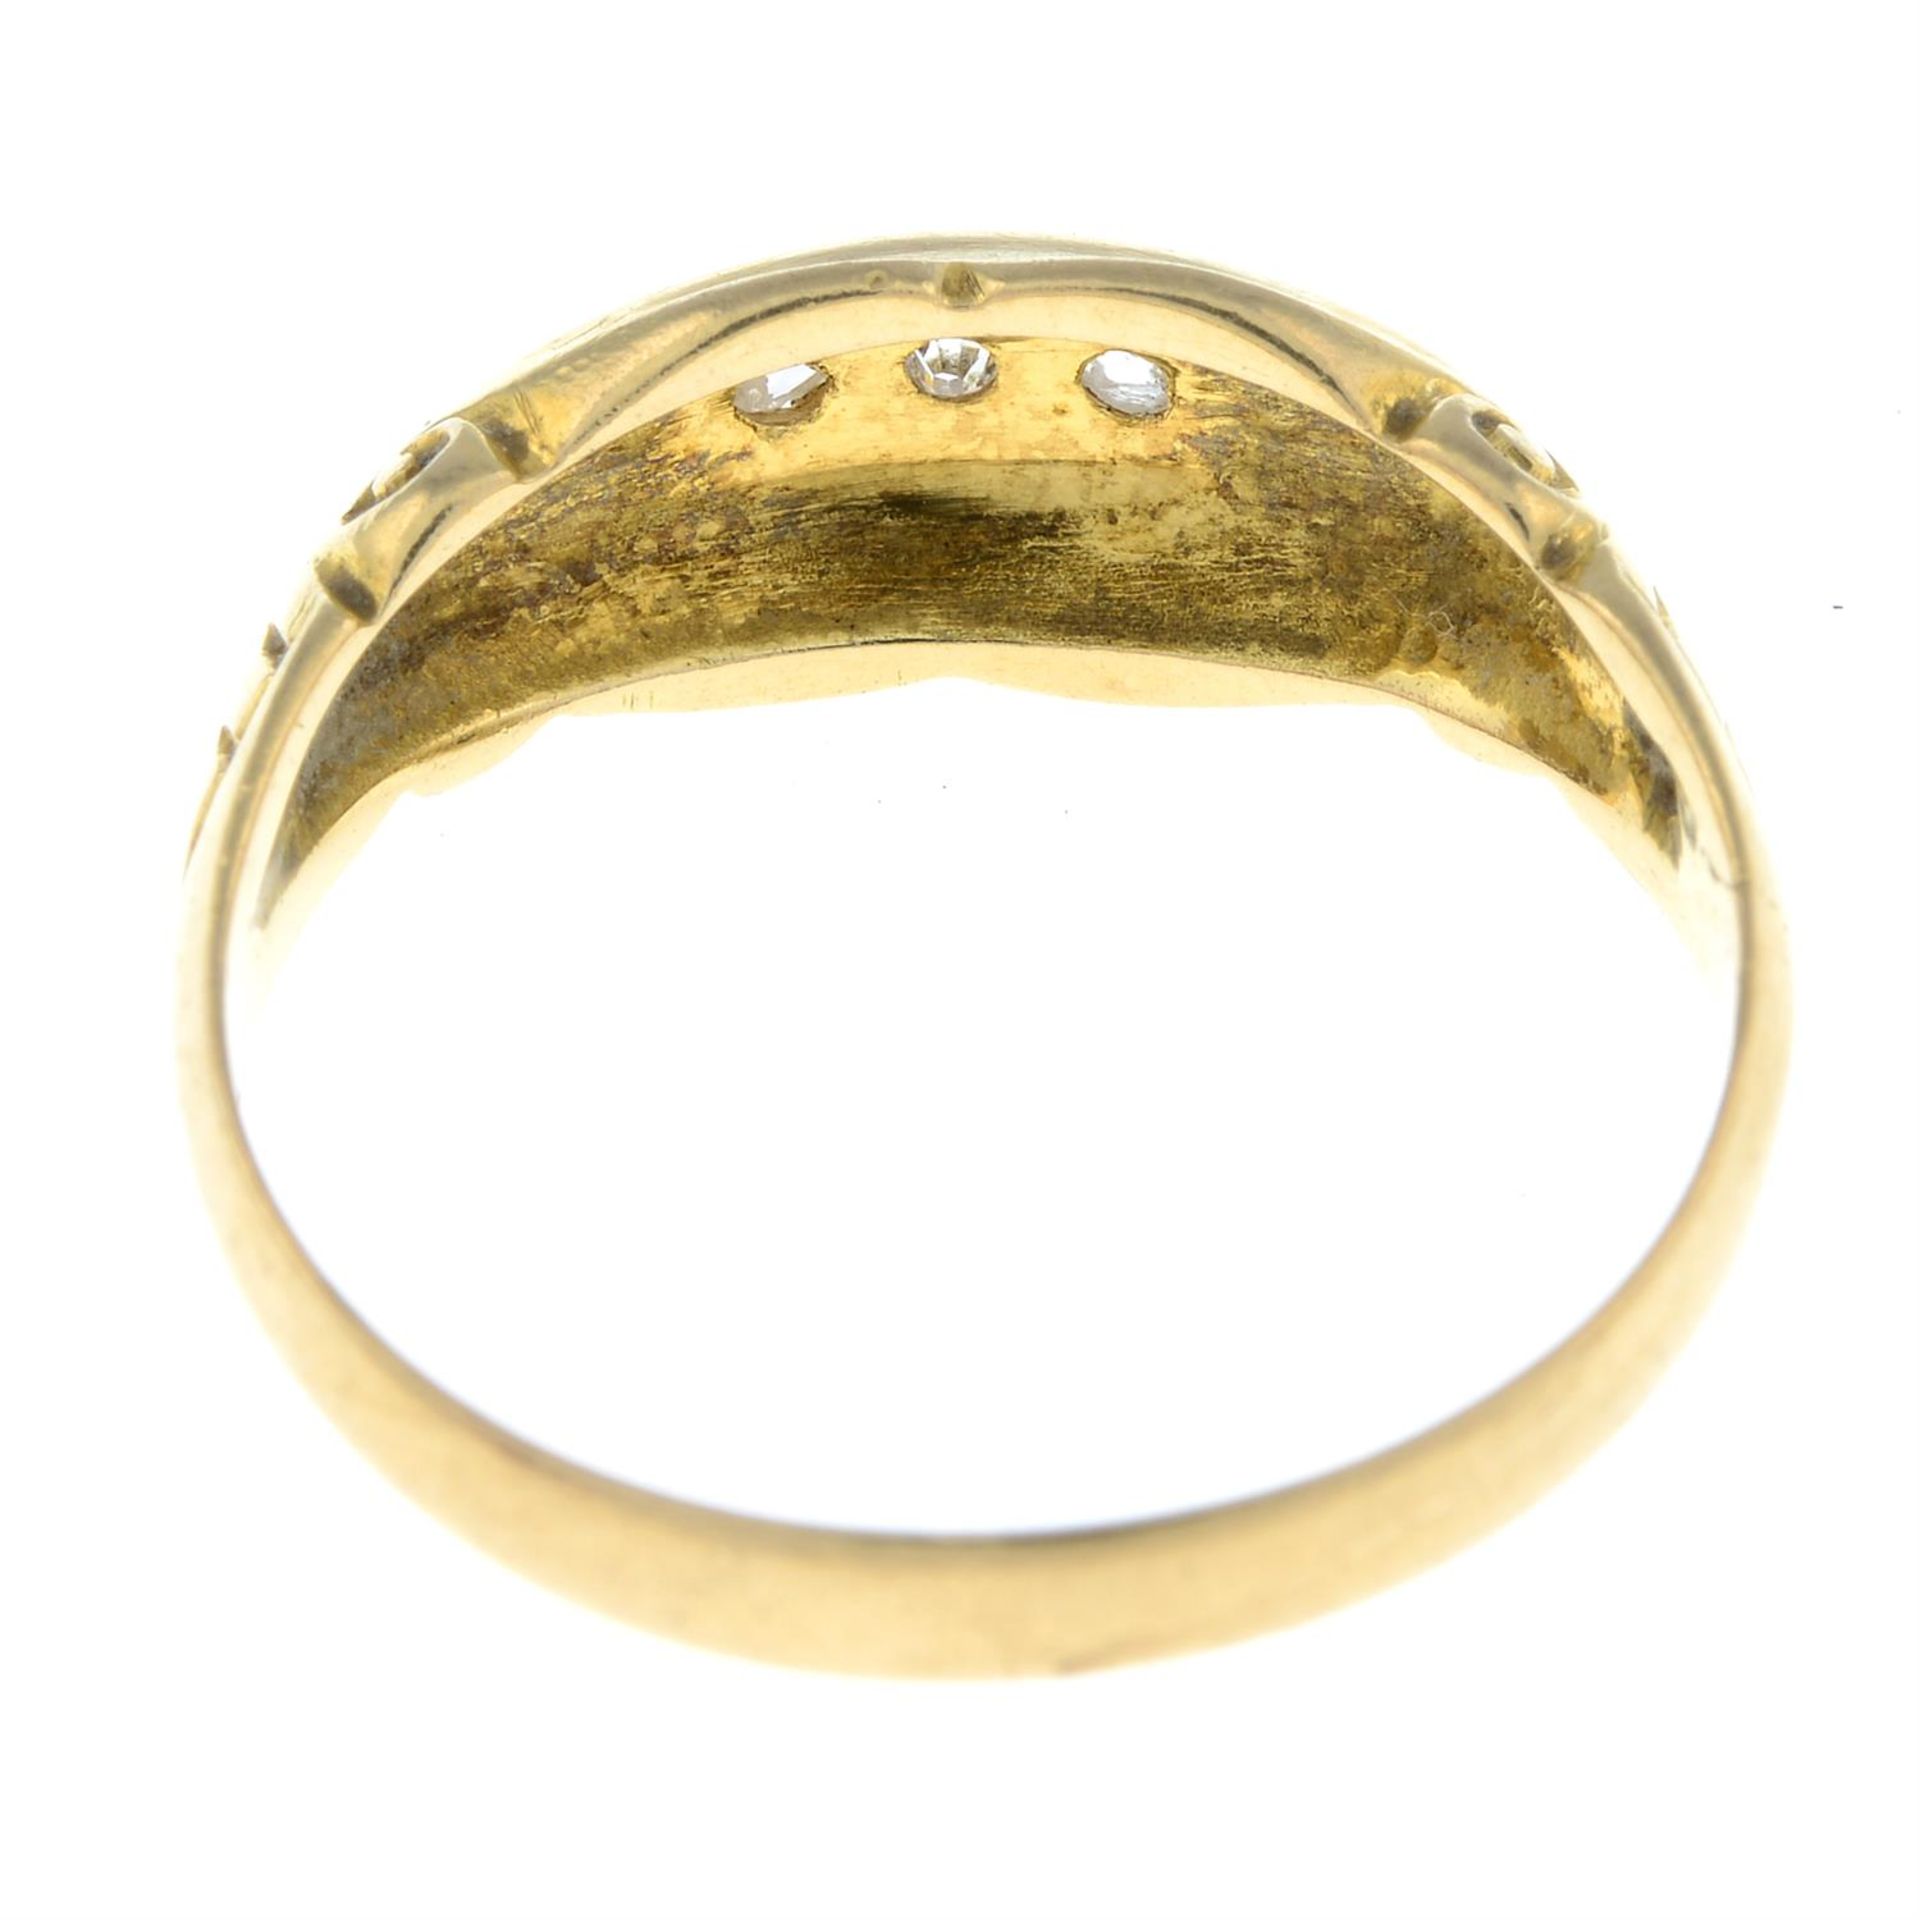 An early 20th century 18ct gold diamond five-stone ring. - Image 2 of 2